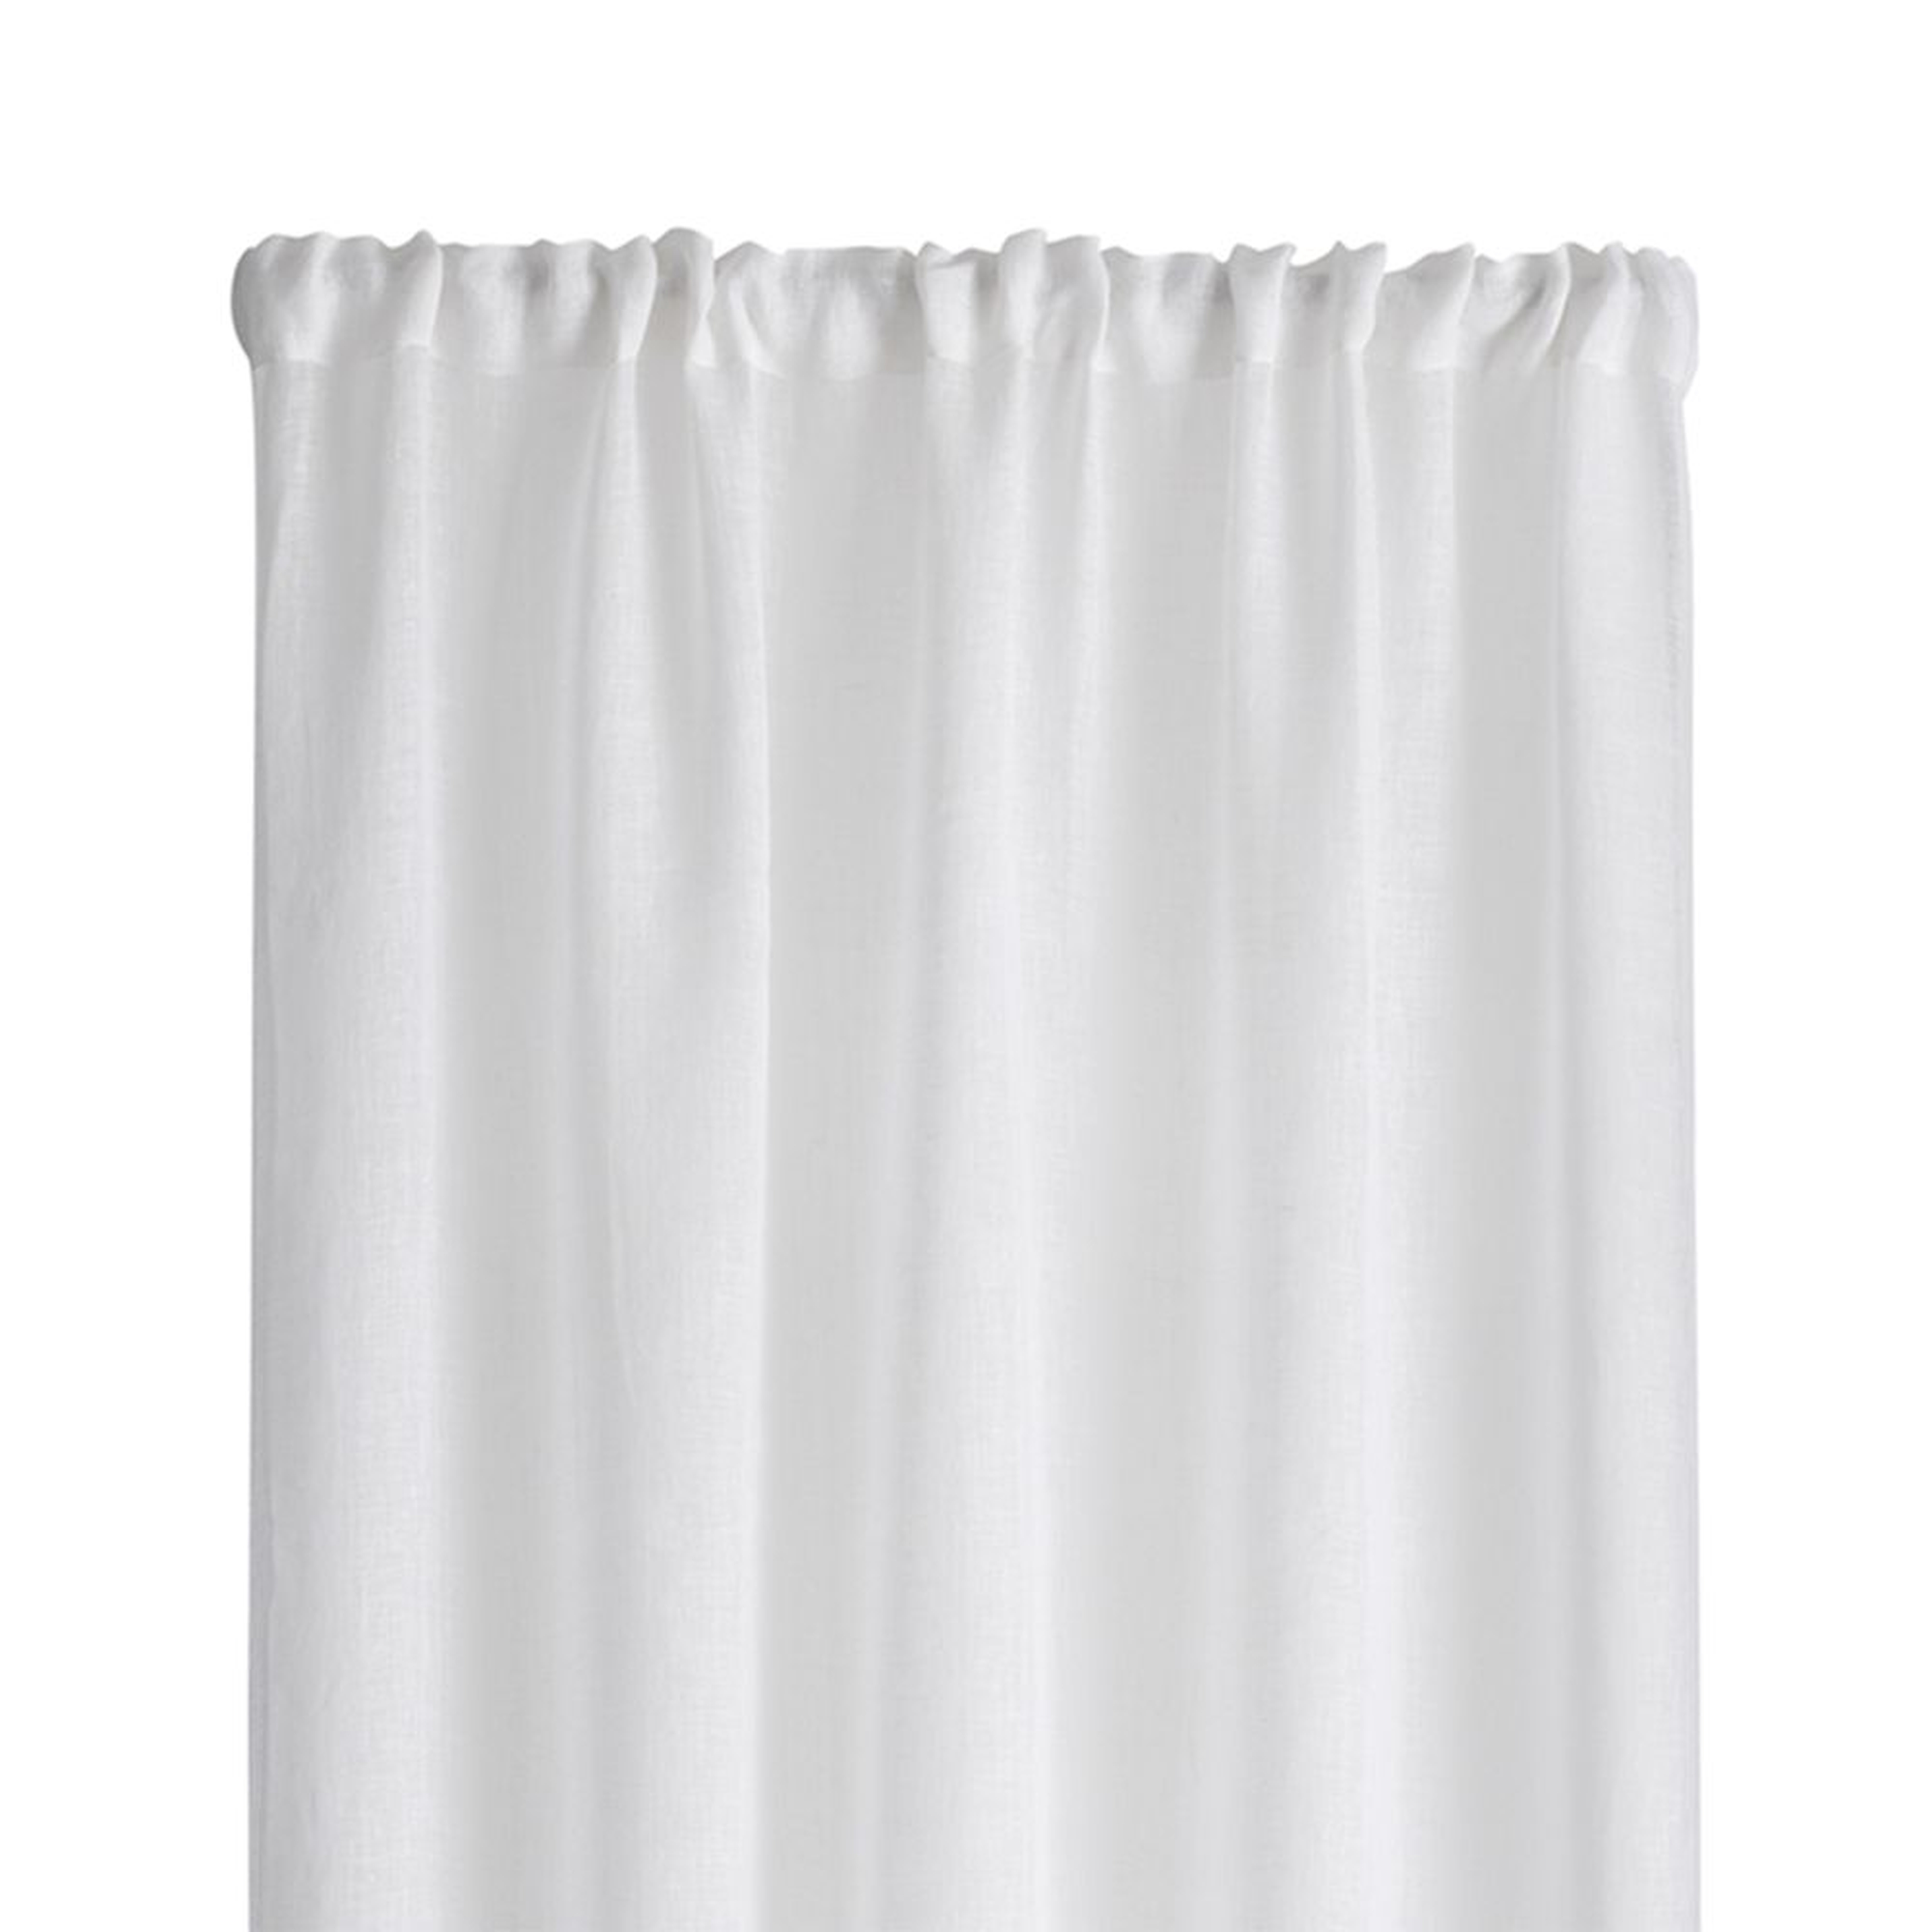 Linen Sheer 52"x84" White Curtain Panel - Crate and Barrel